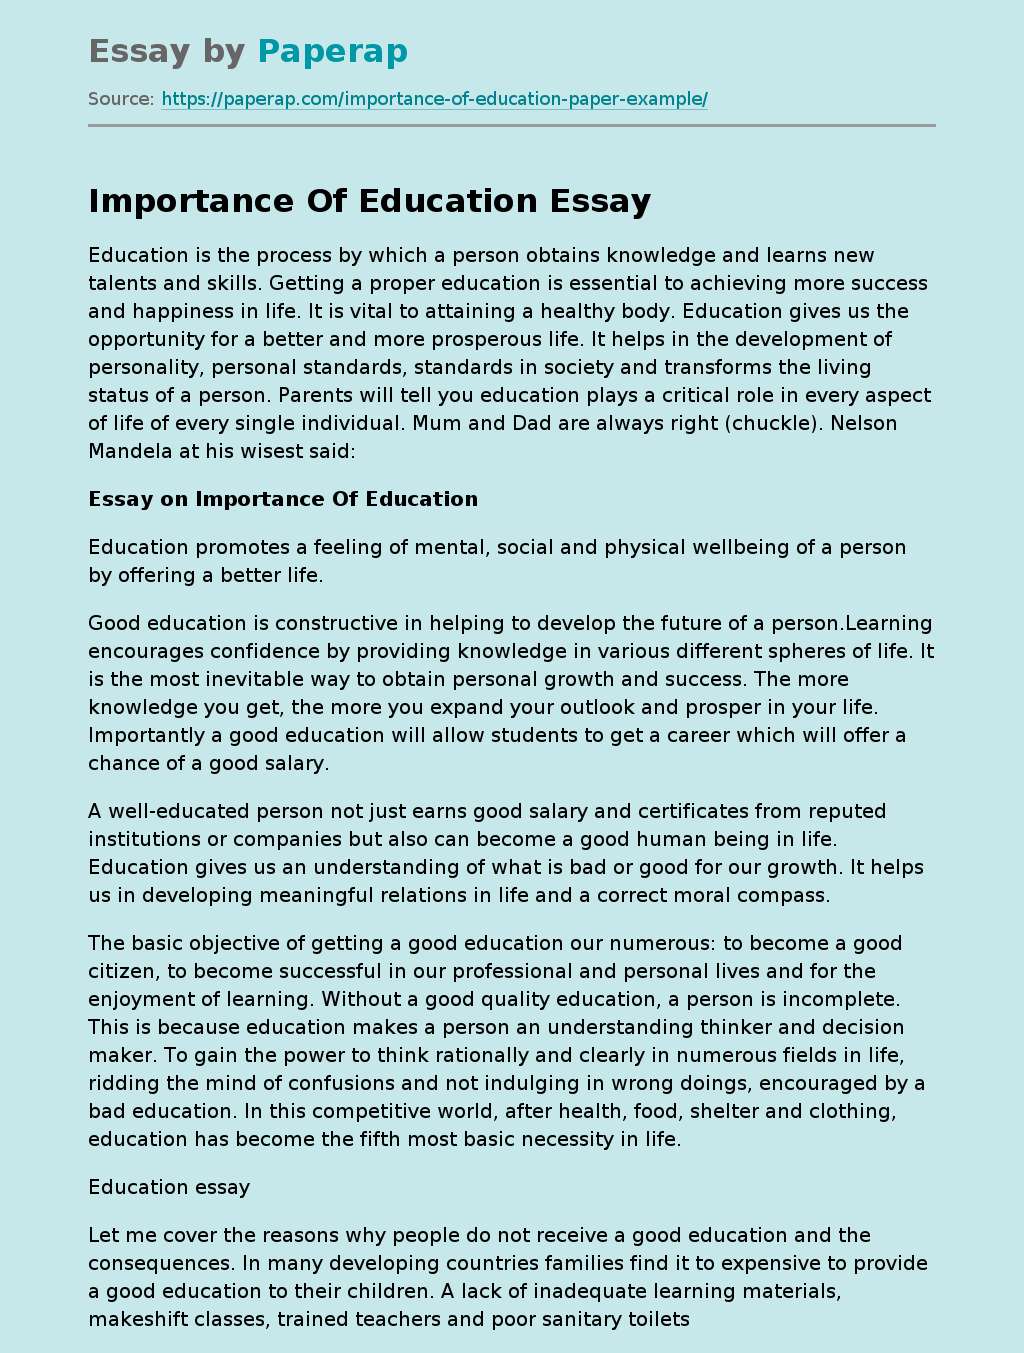 importance of education easy essay